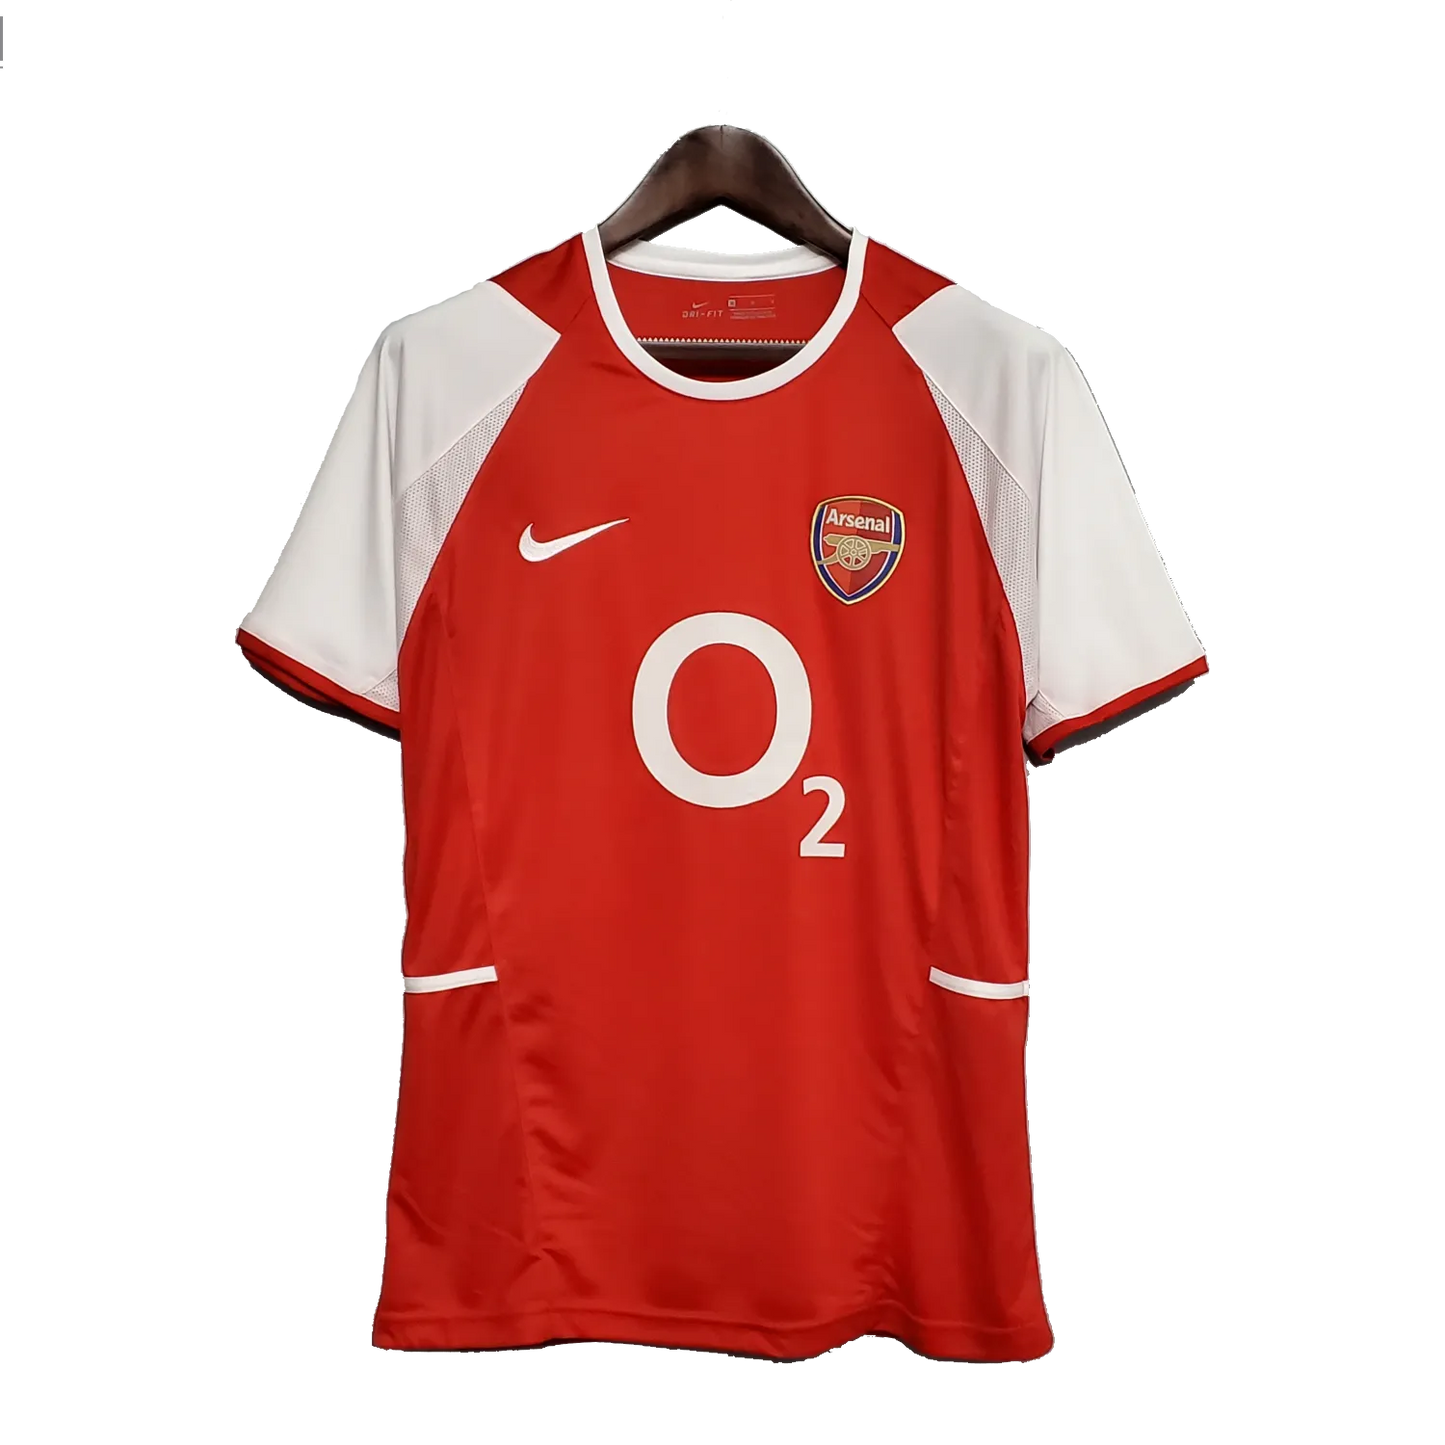 Arsenal Retro Home Jersey 2002/04 Red Men's